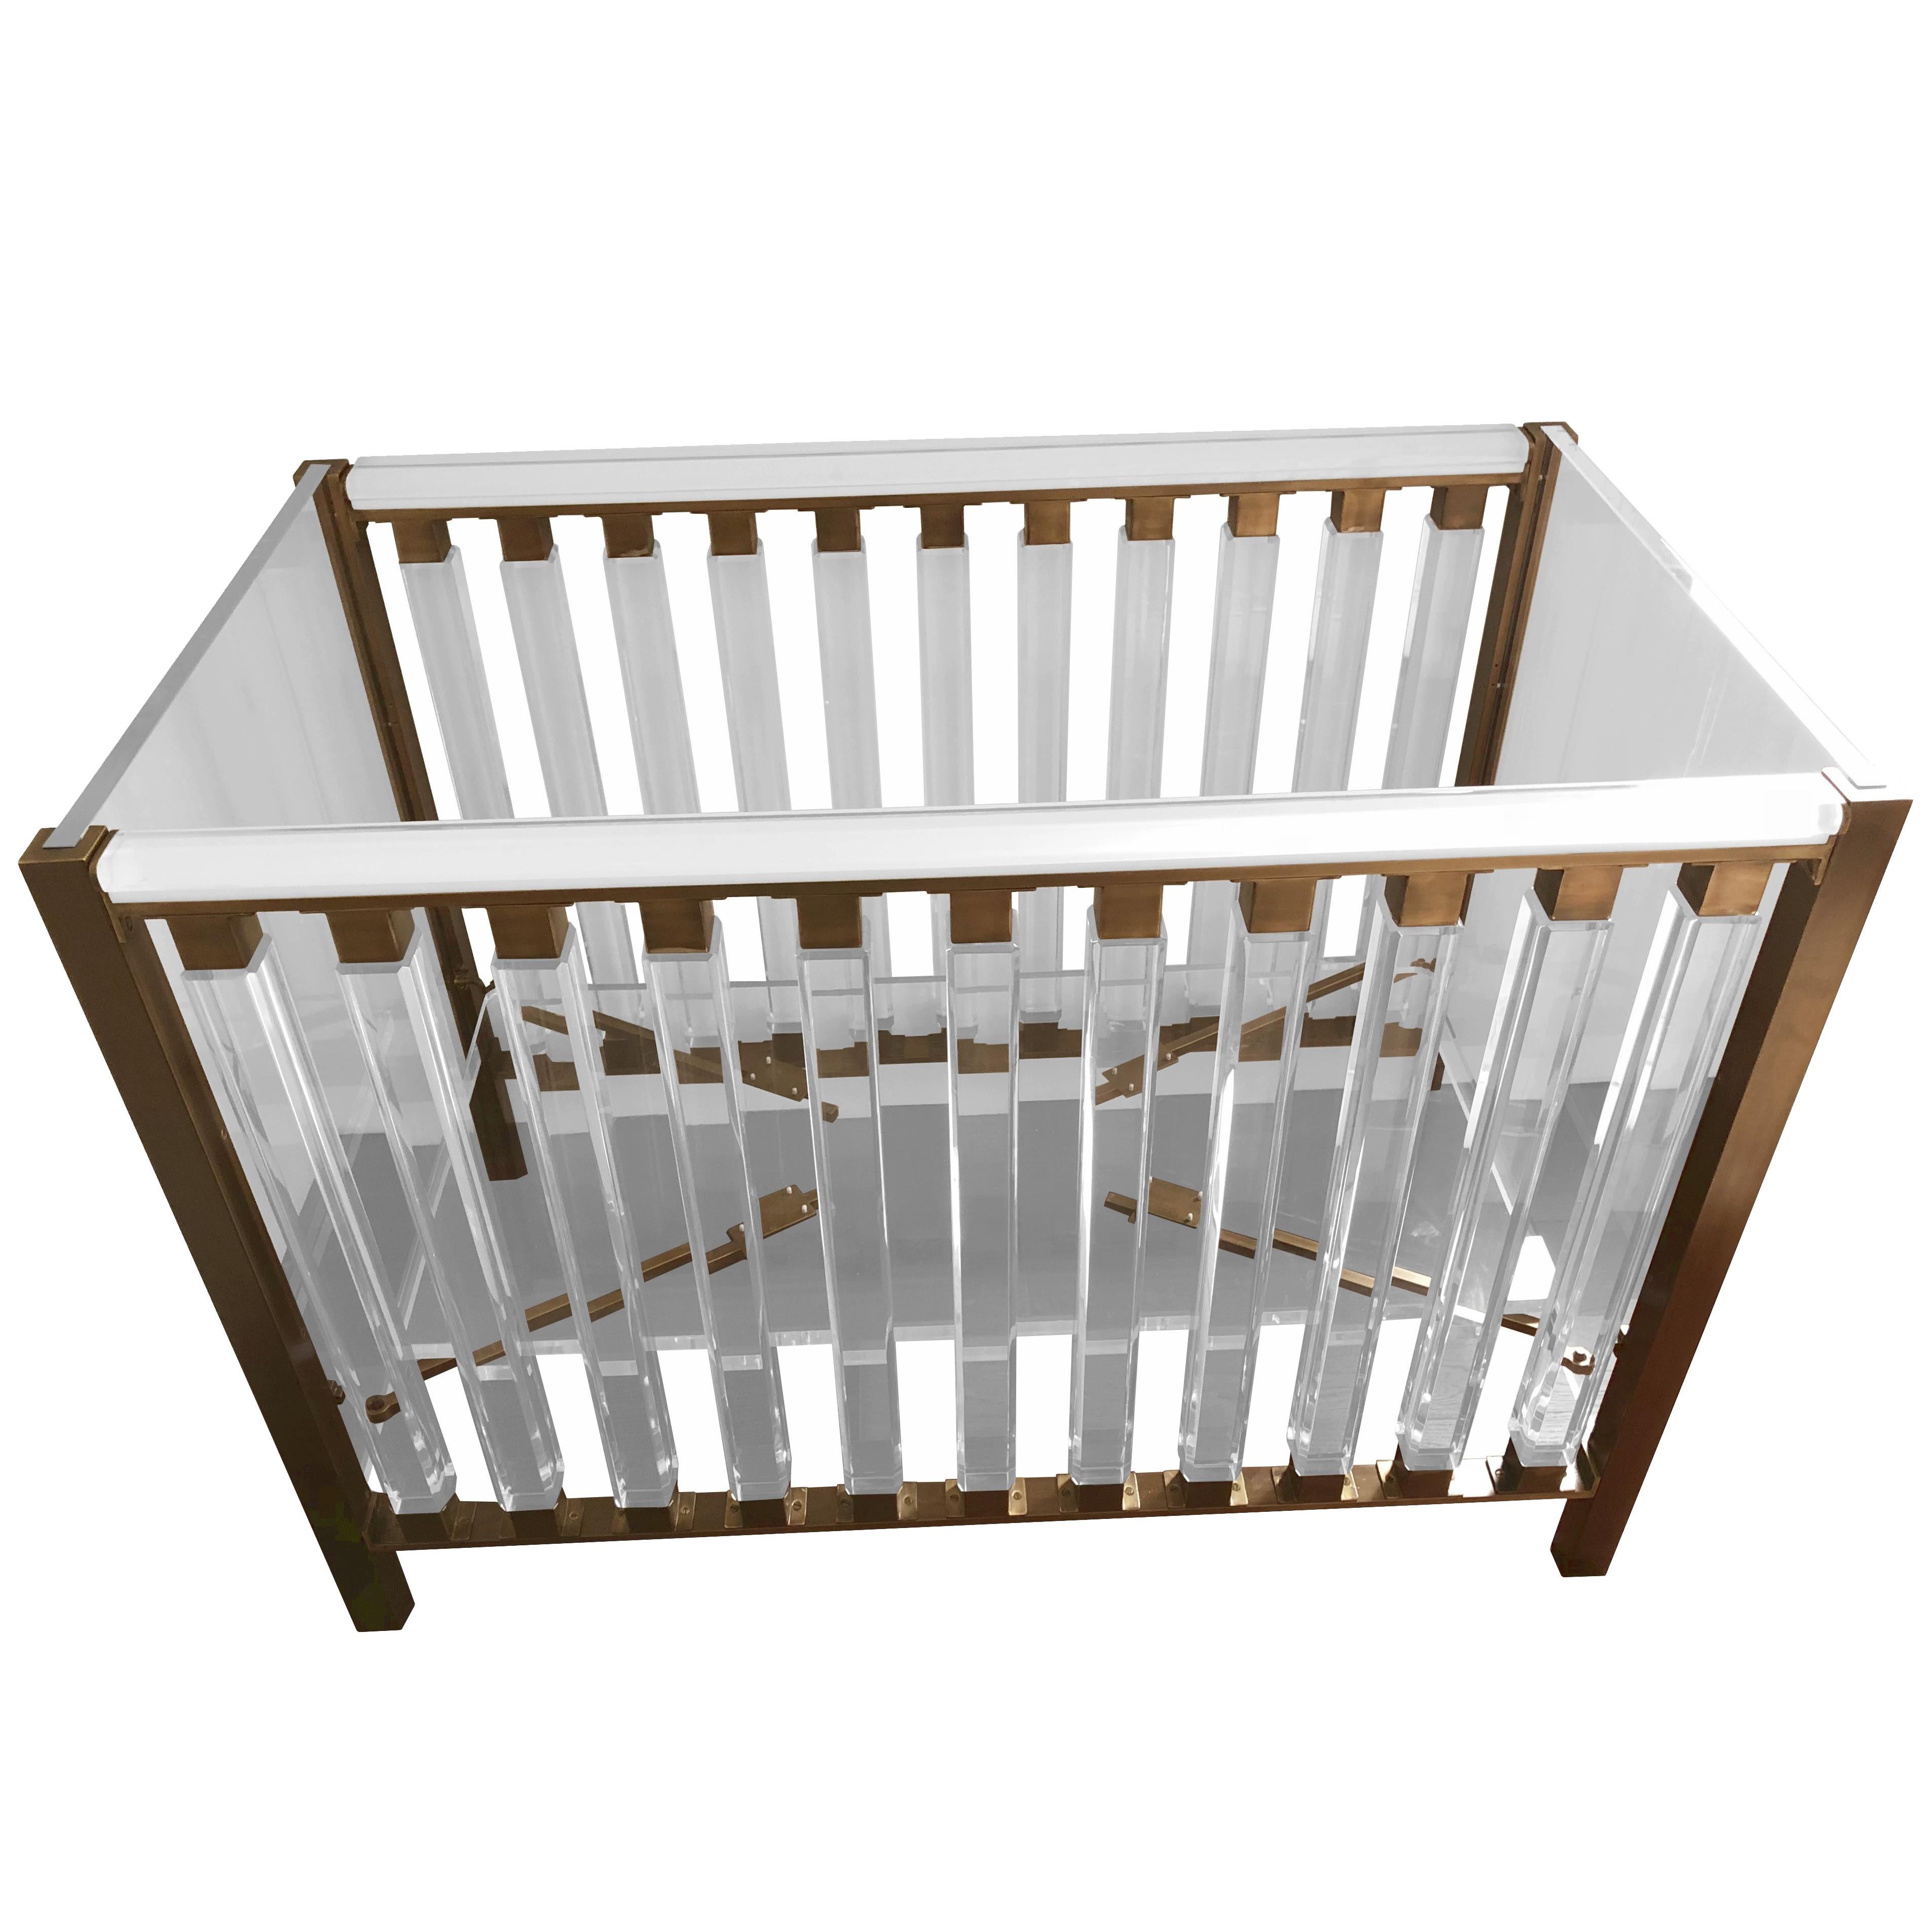 "Hasen" Baby Crib in Lucite & Brass by Cain for Cain Modern, Limited Edition